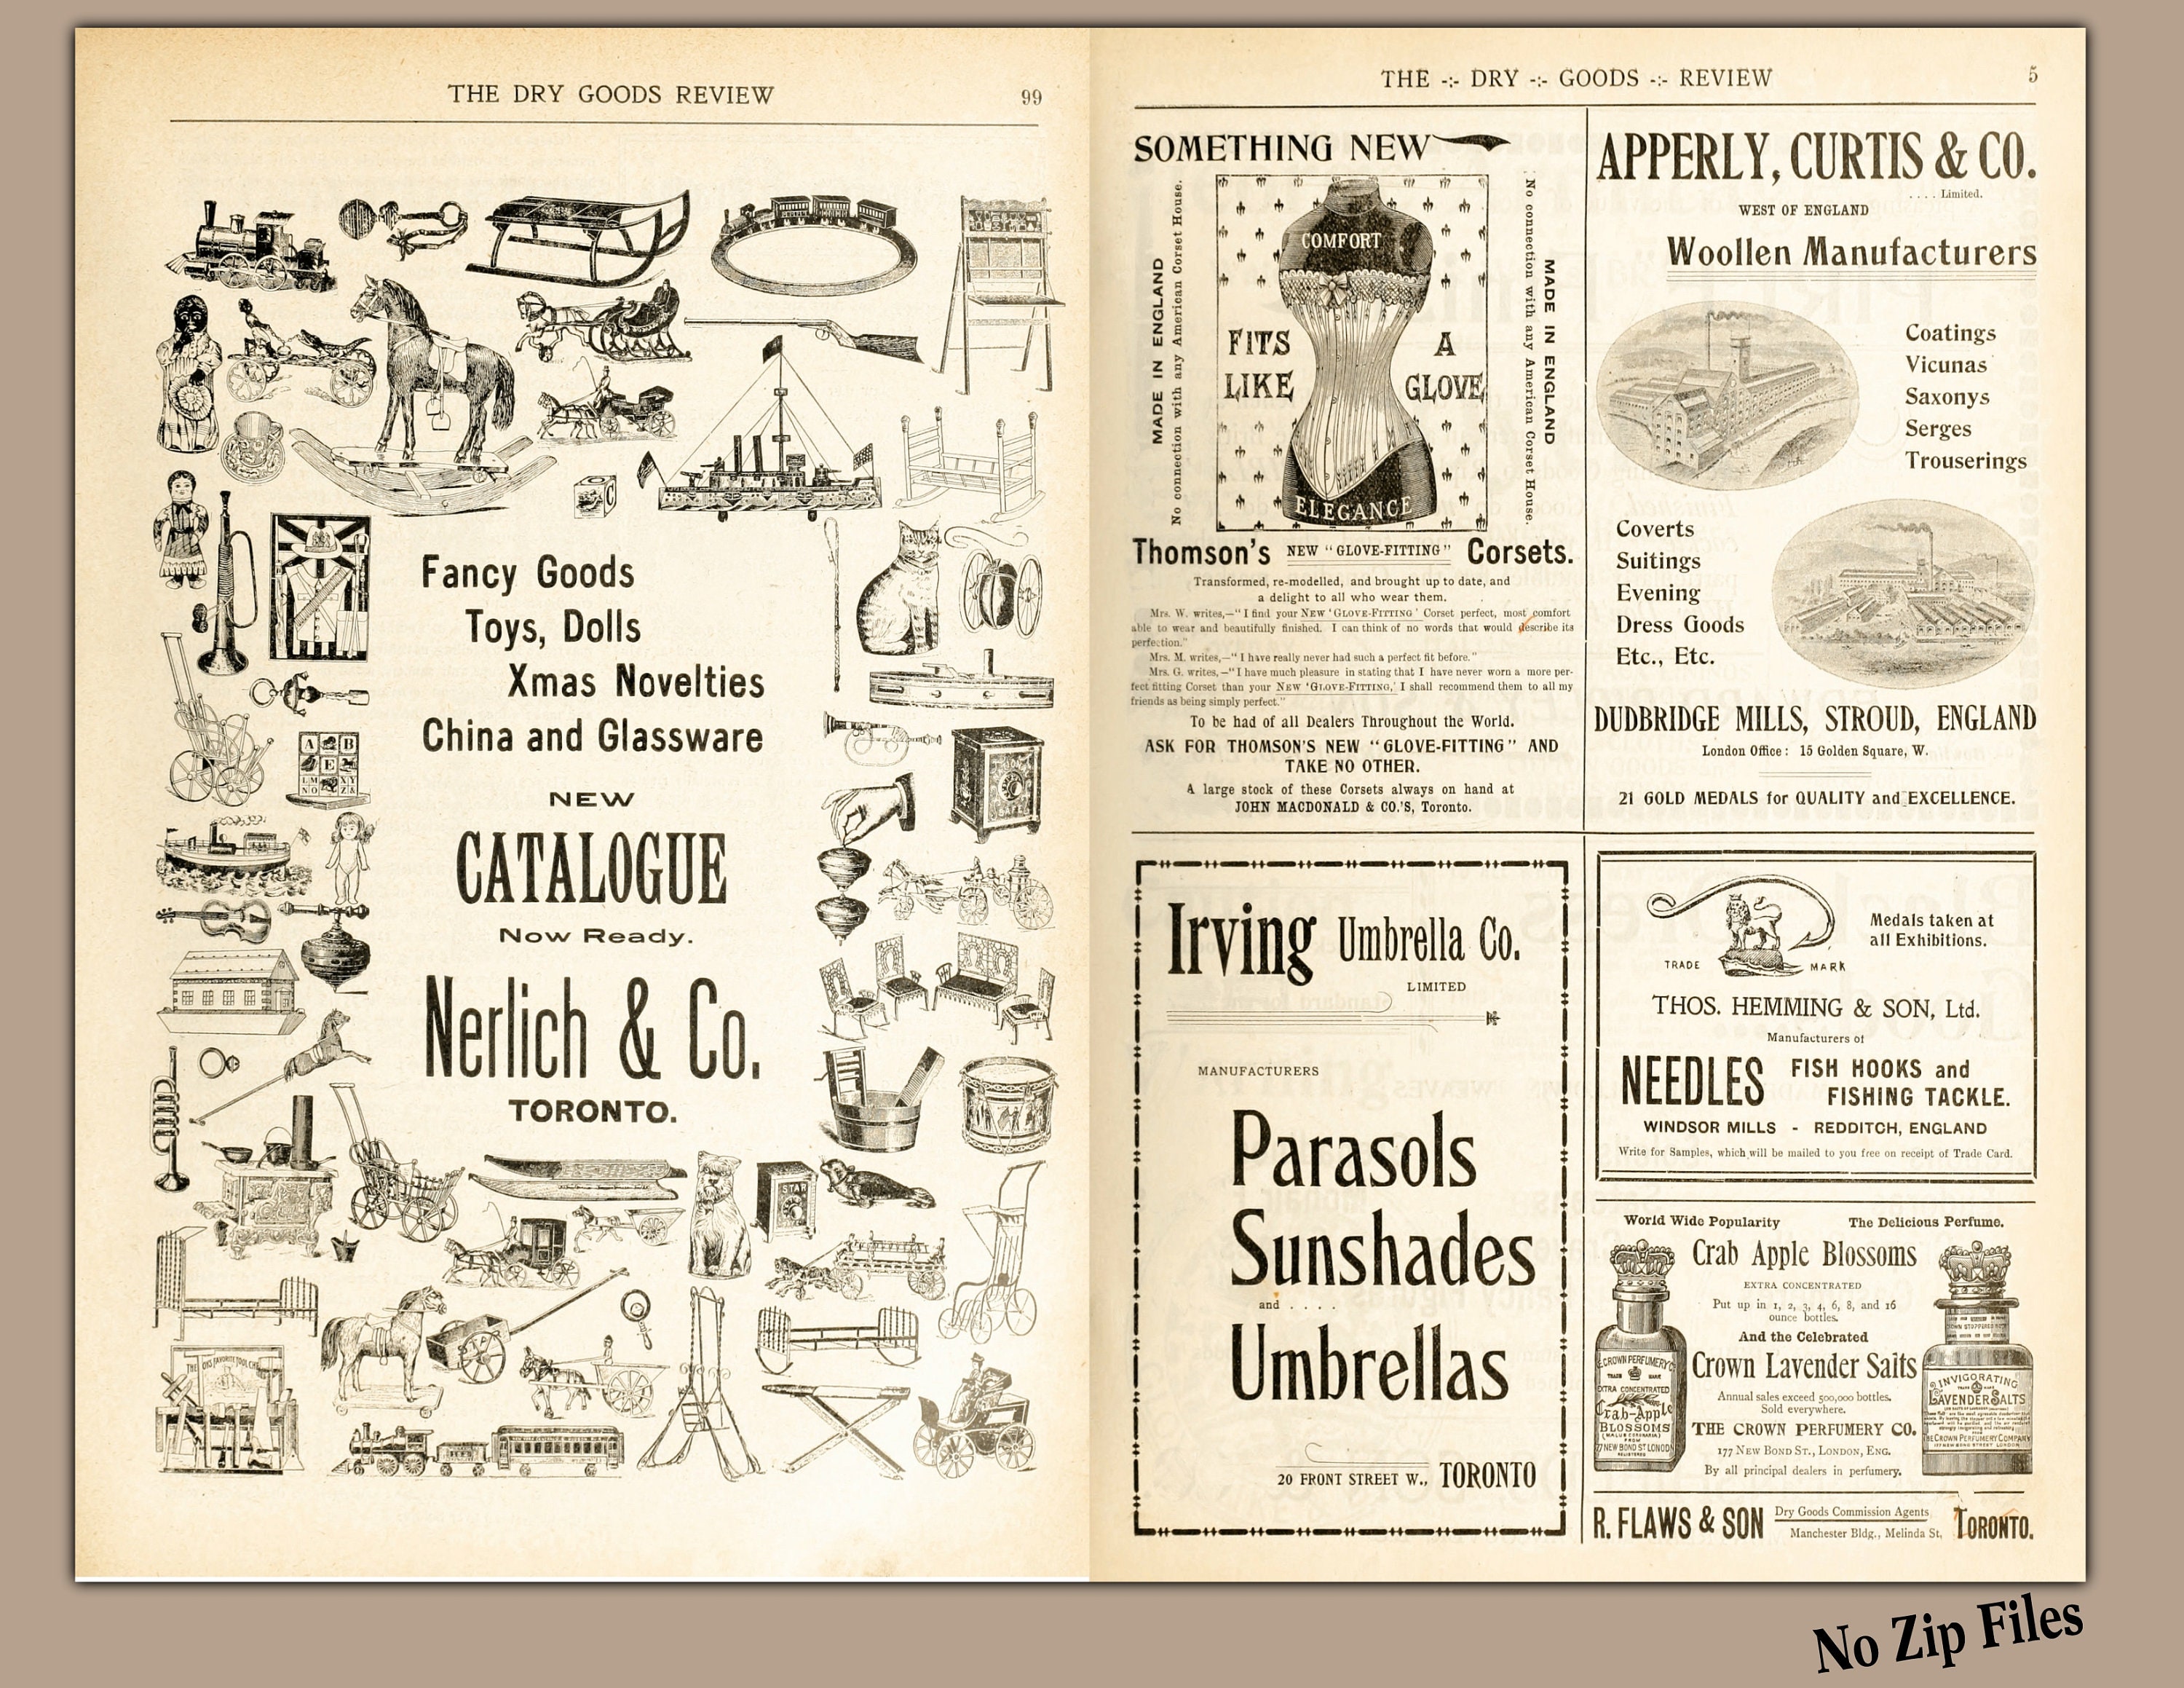 Vintage Dry Goods Catalog Pages: 20-sheet Collection of Ephemera